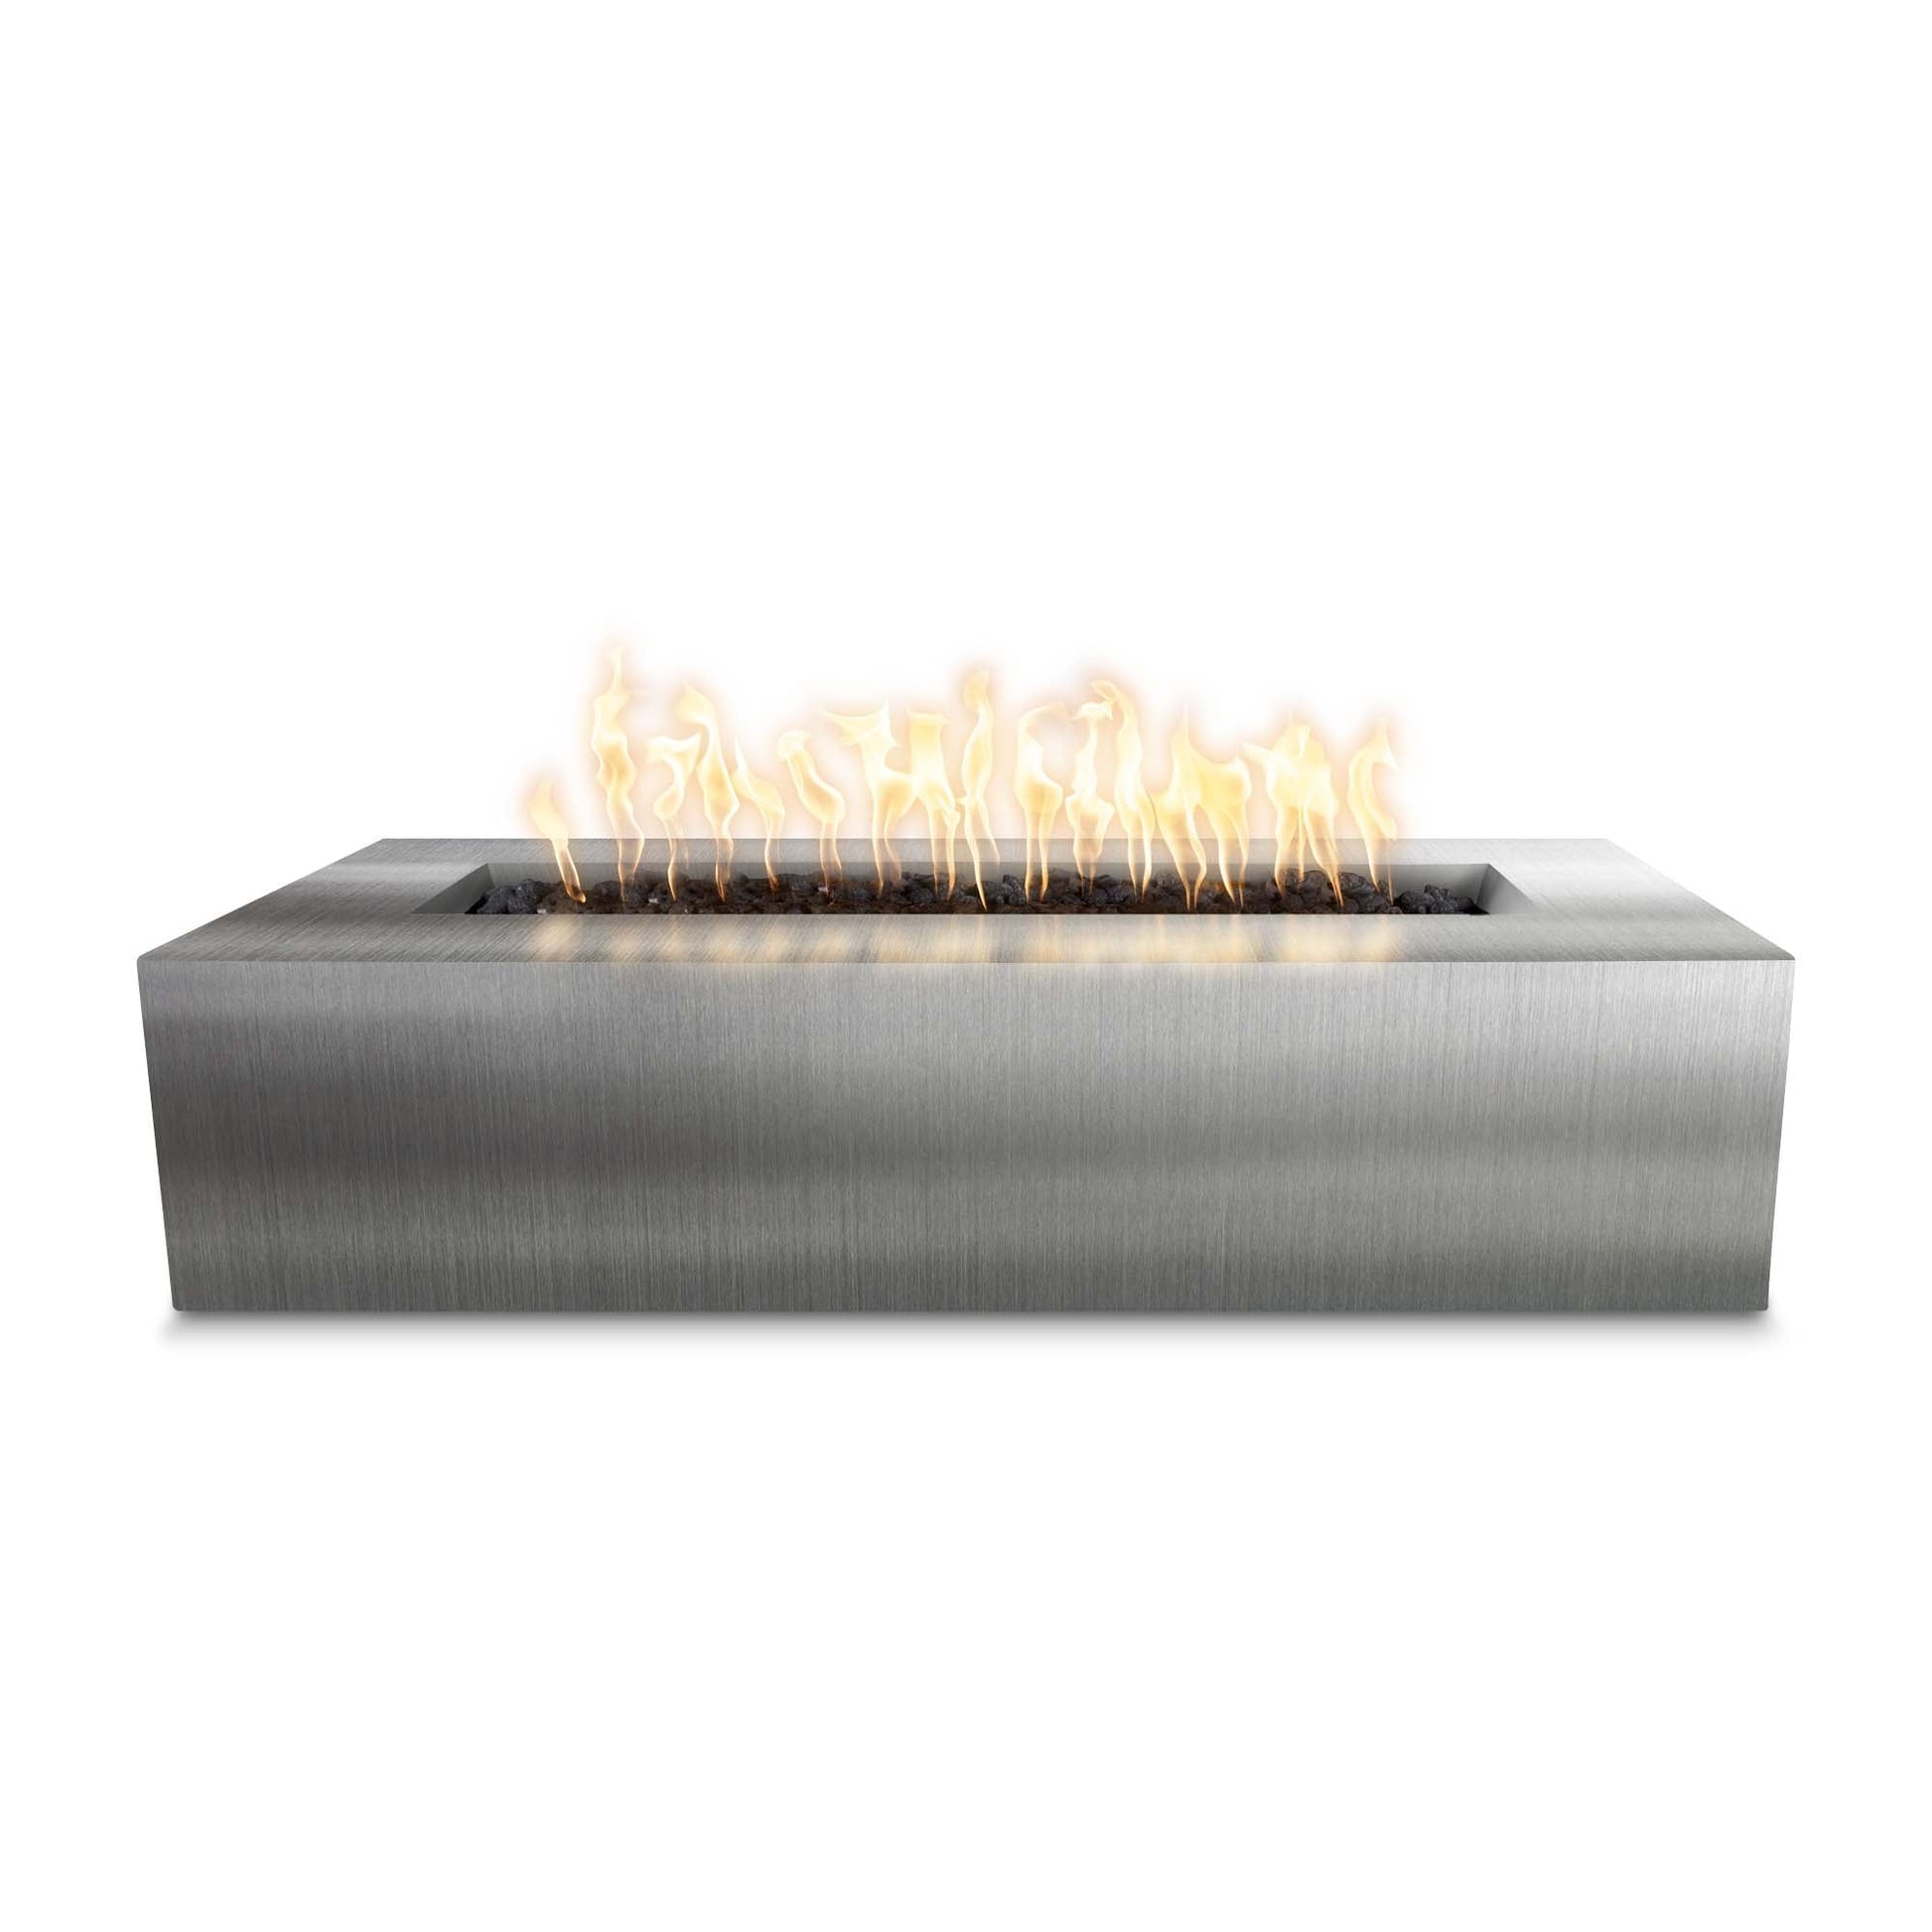 The Outdoor Plus Rectangular Regal 60" Corten Steel Liquid Propane Fire Pit with Match Lit with Flame Sense Ignition